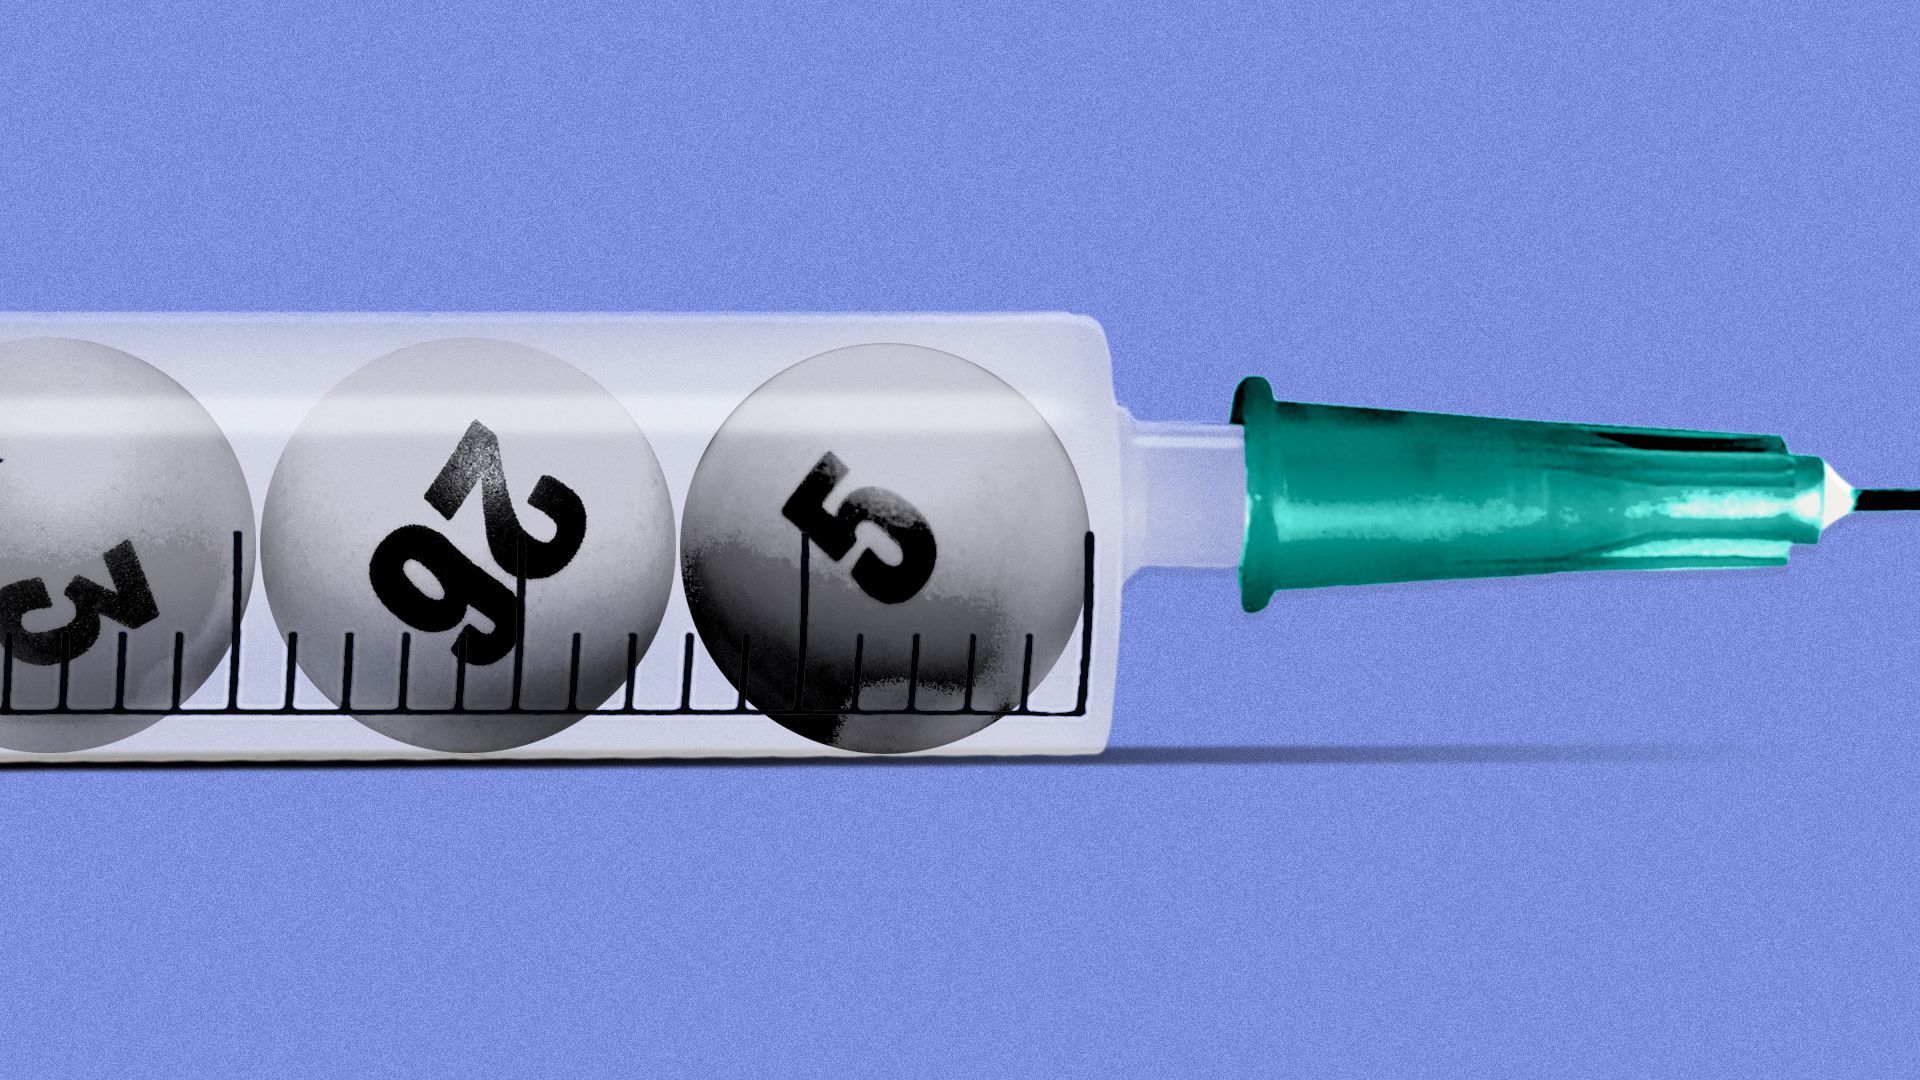 Illustration of a syringe with numbered lottery balls inside.